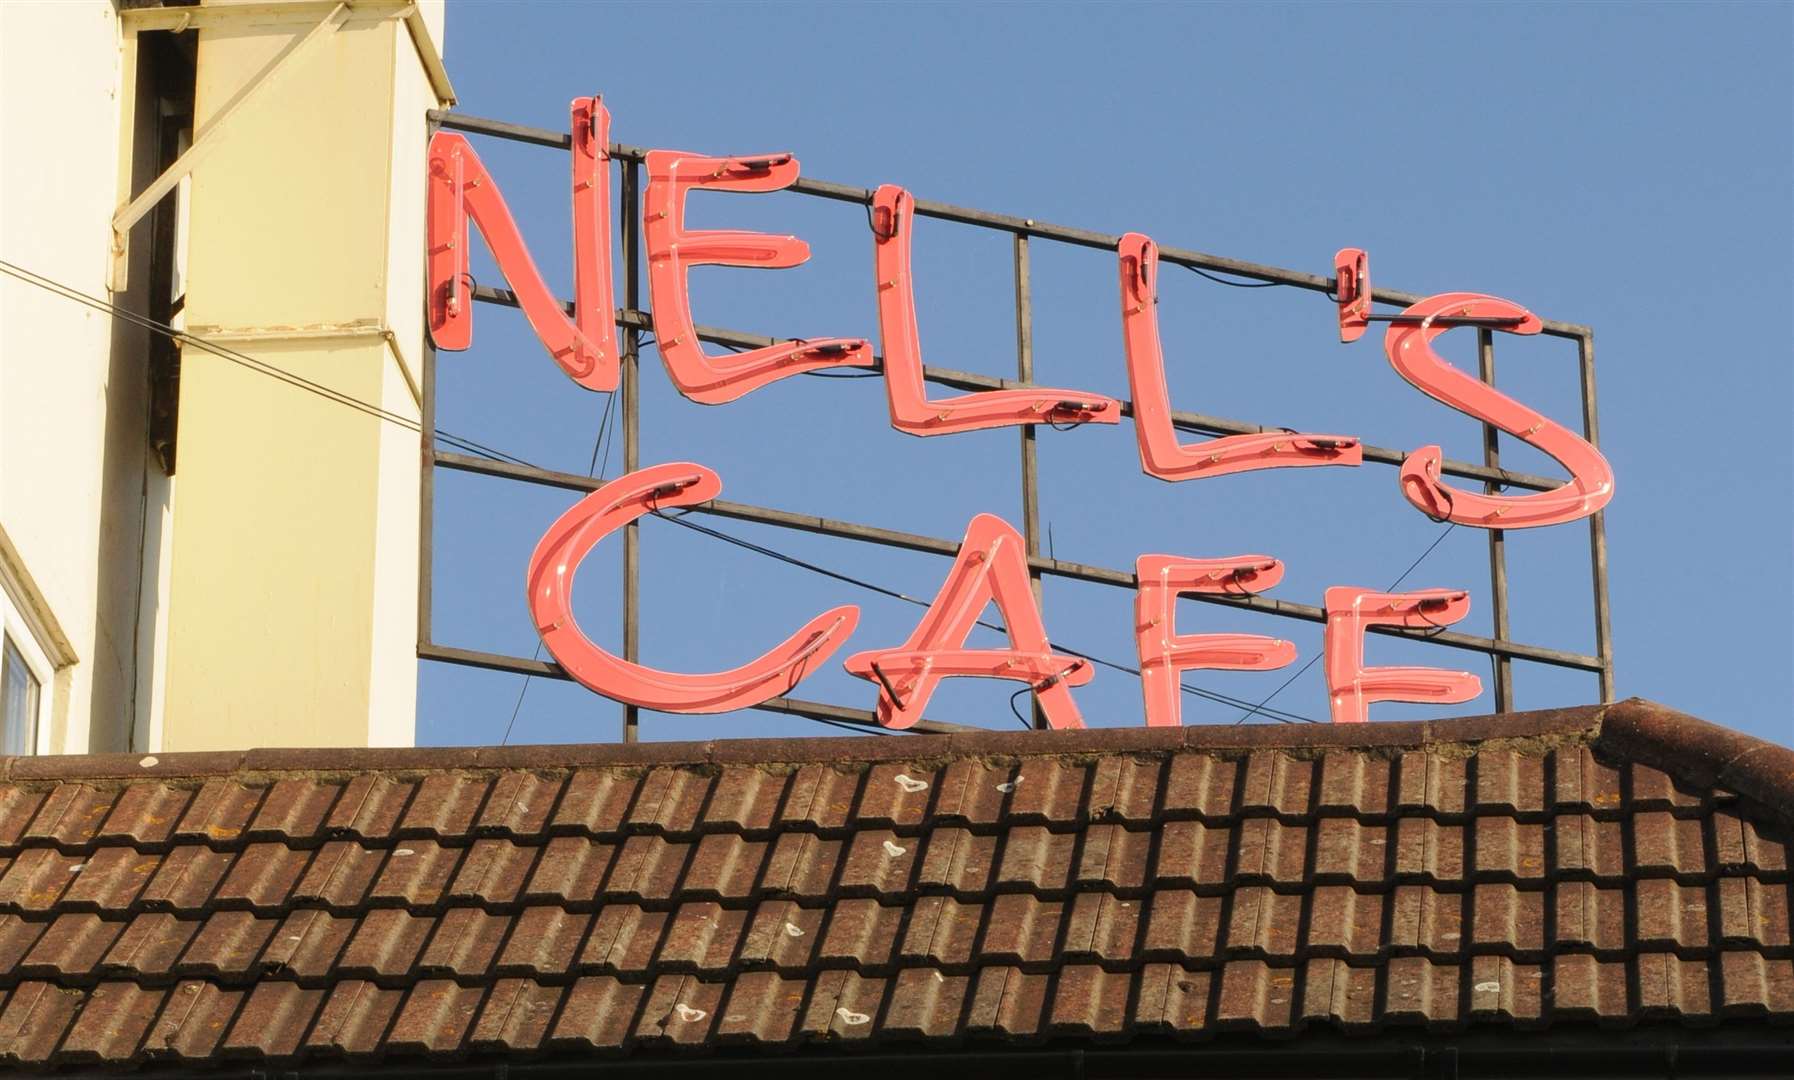 Nell's Cafe is no stranger to hosting film and TV stars